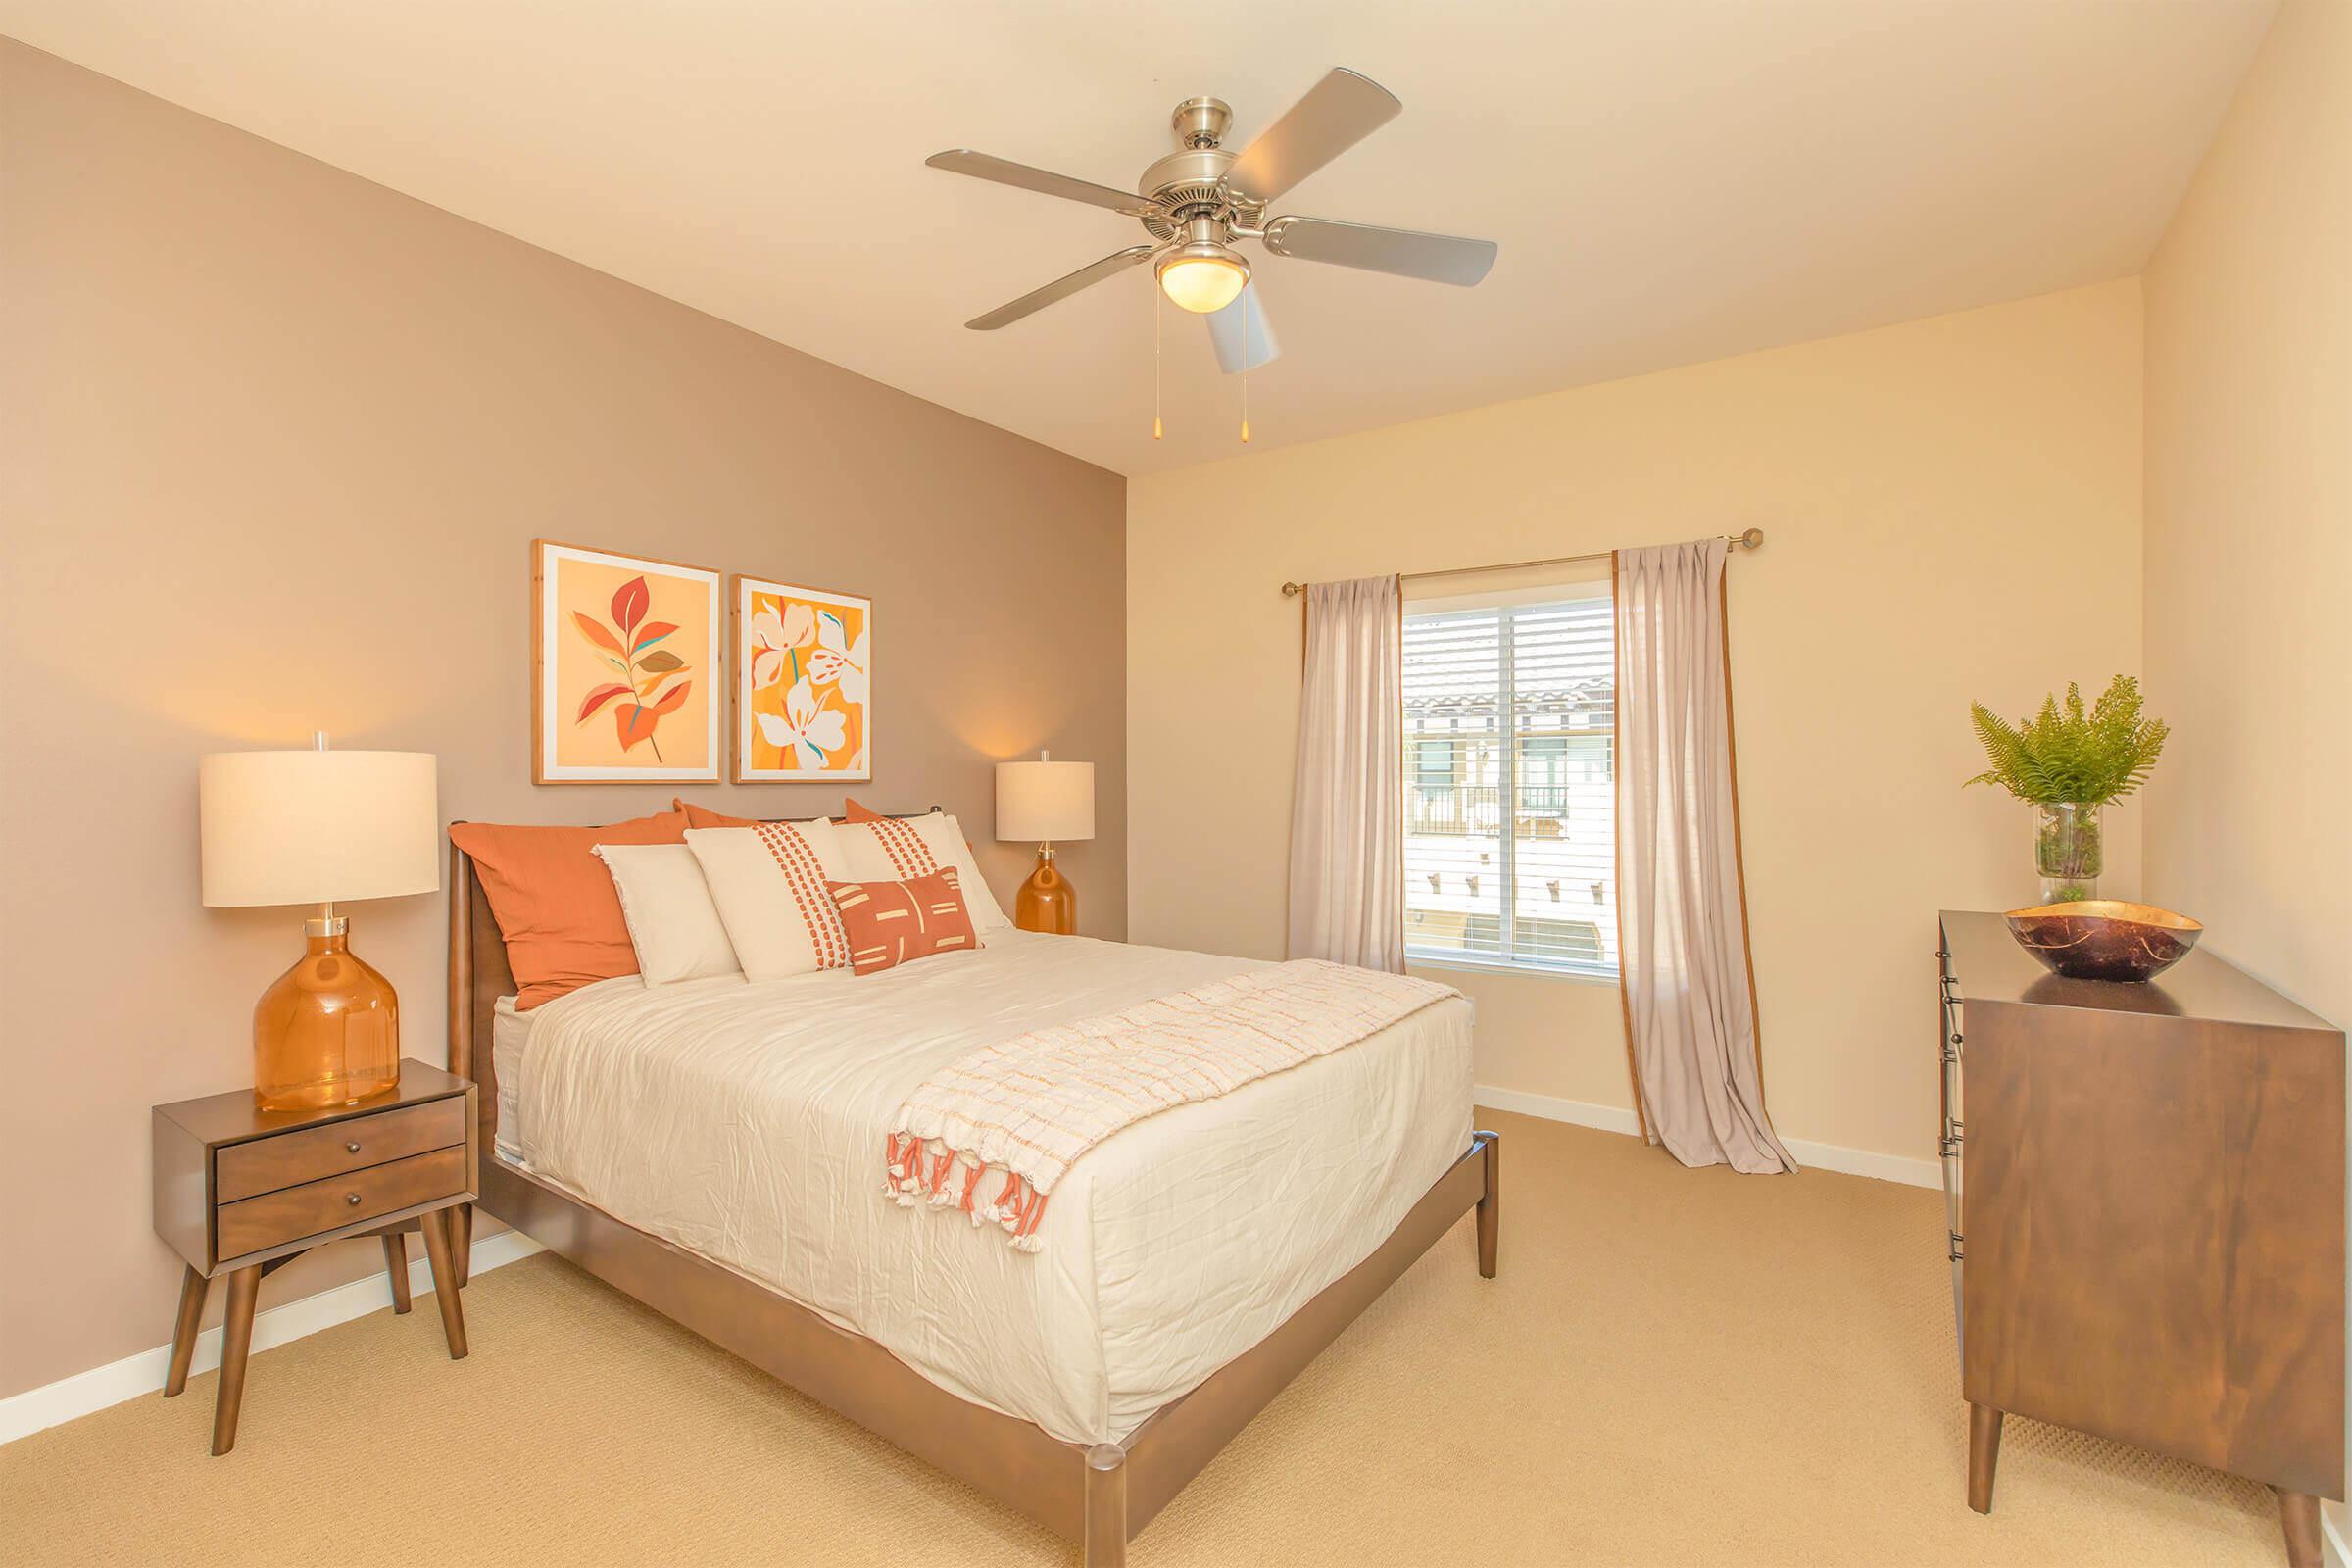 Bedroom with orange accent pillows